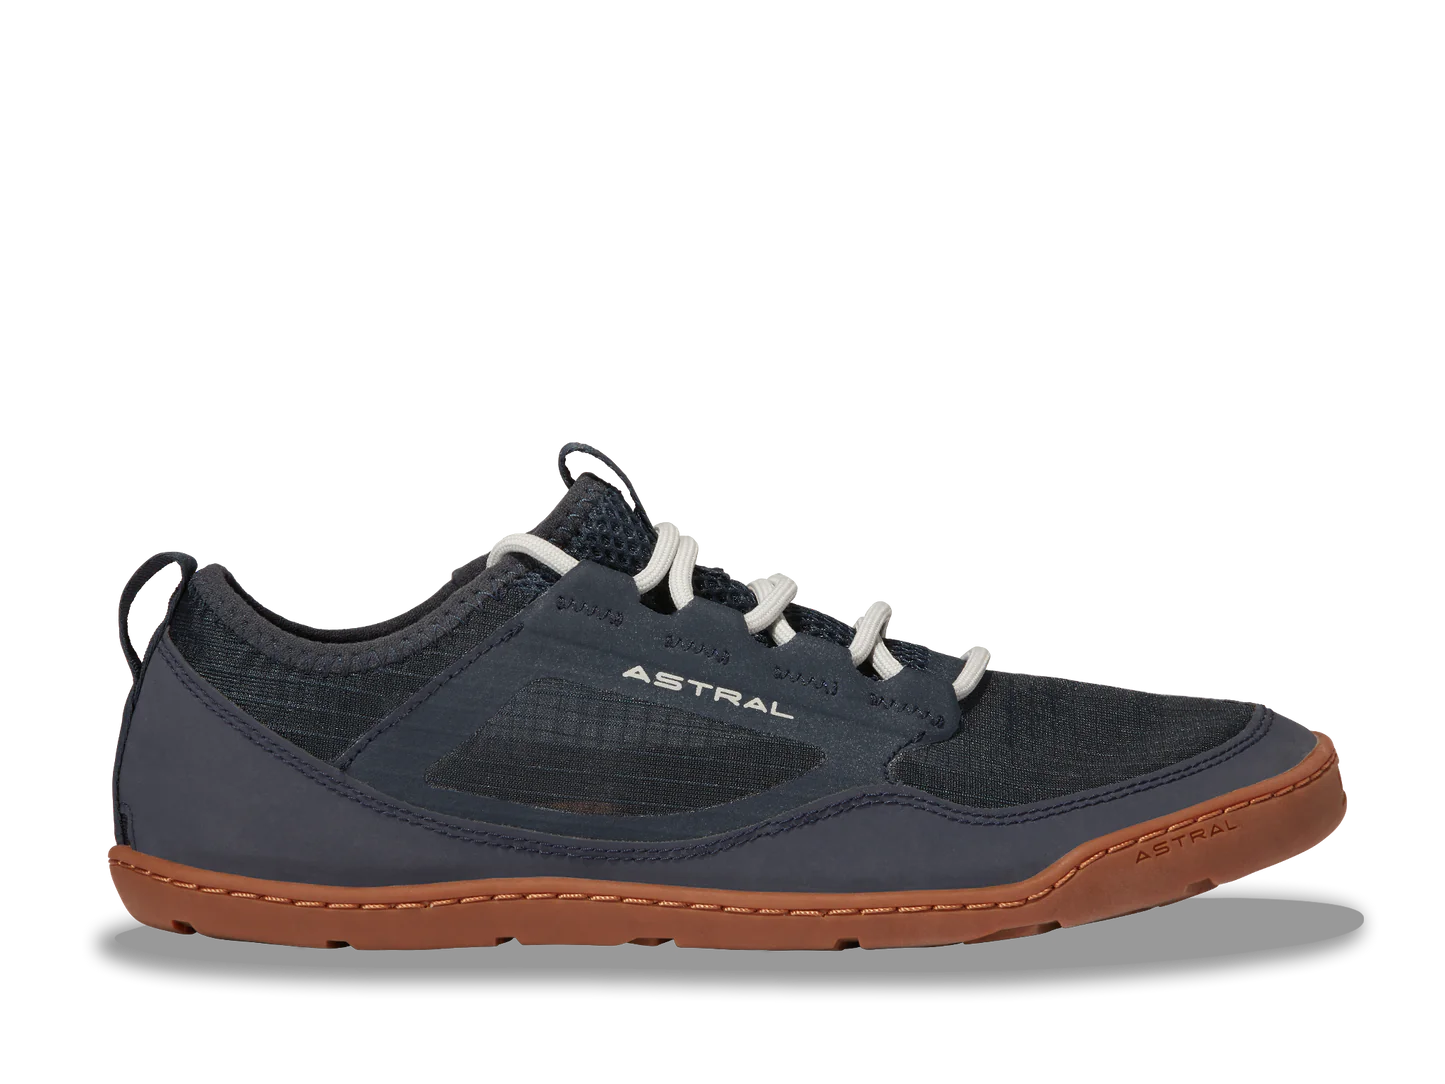 Astral-Shoes-LoyakAC-ClassicNavy-Womens-Outside_1445x